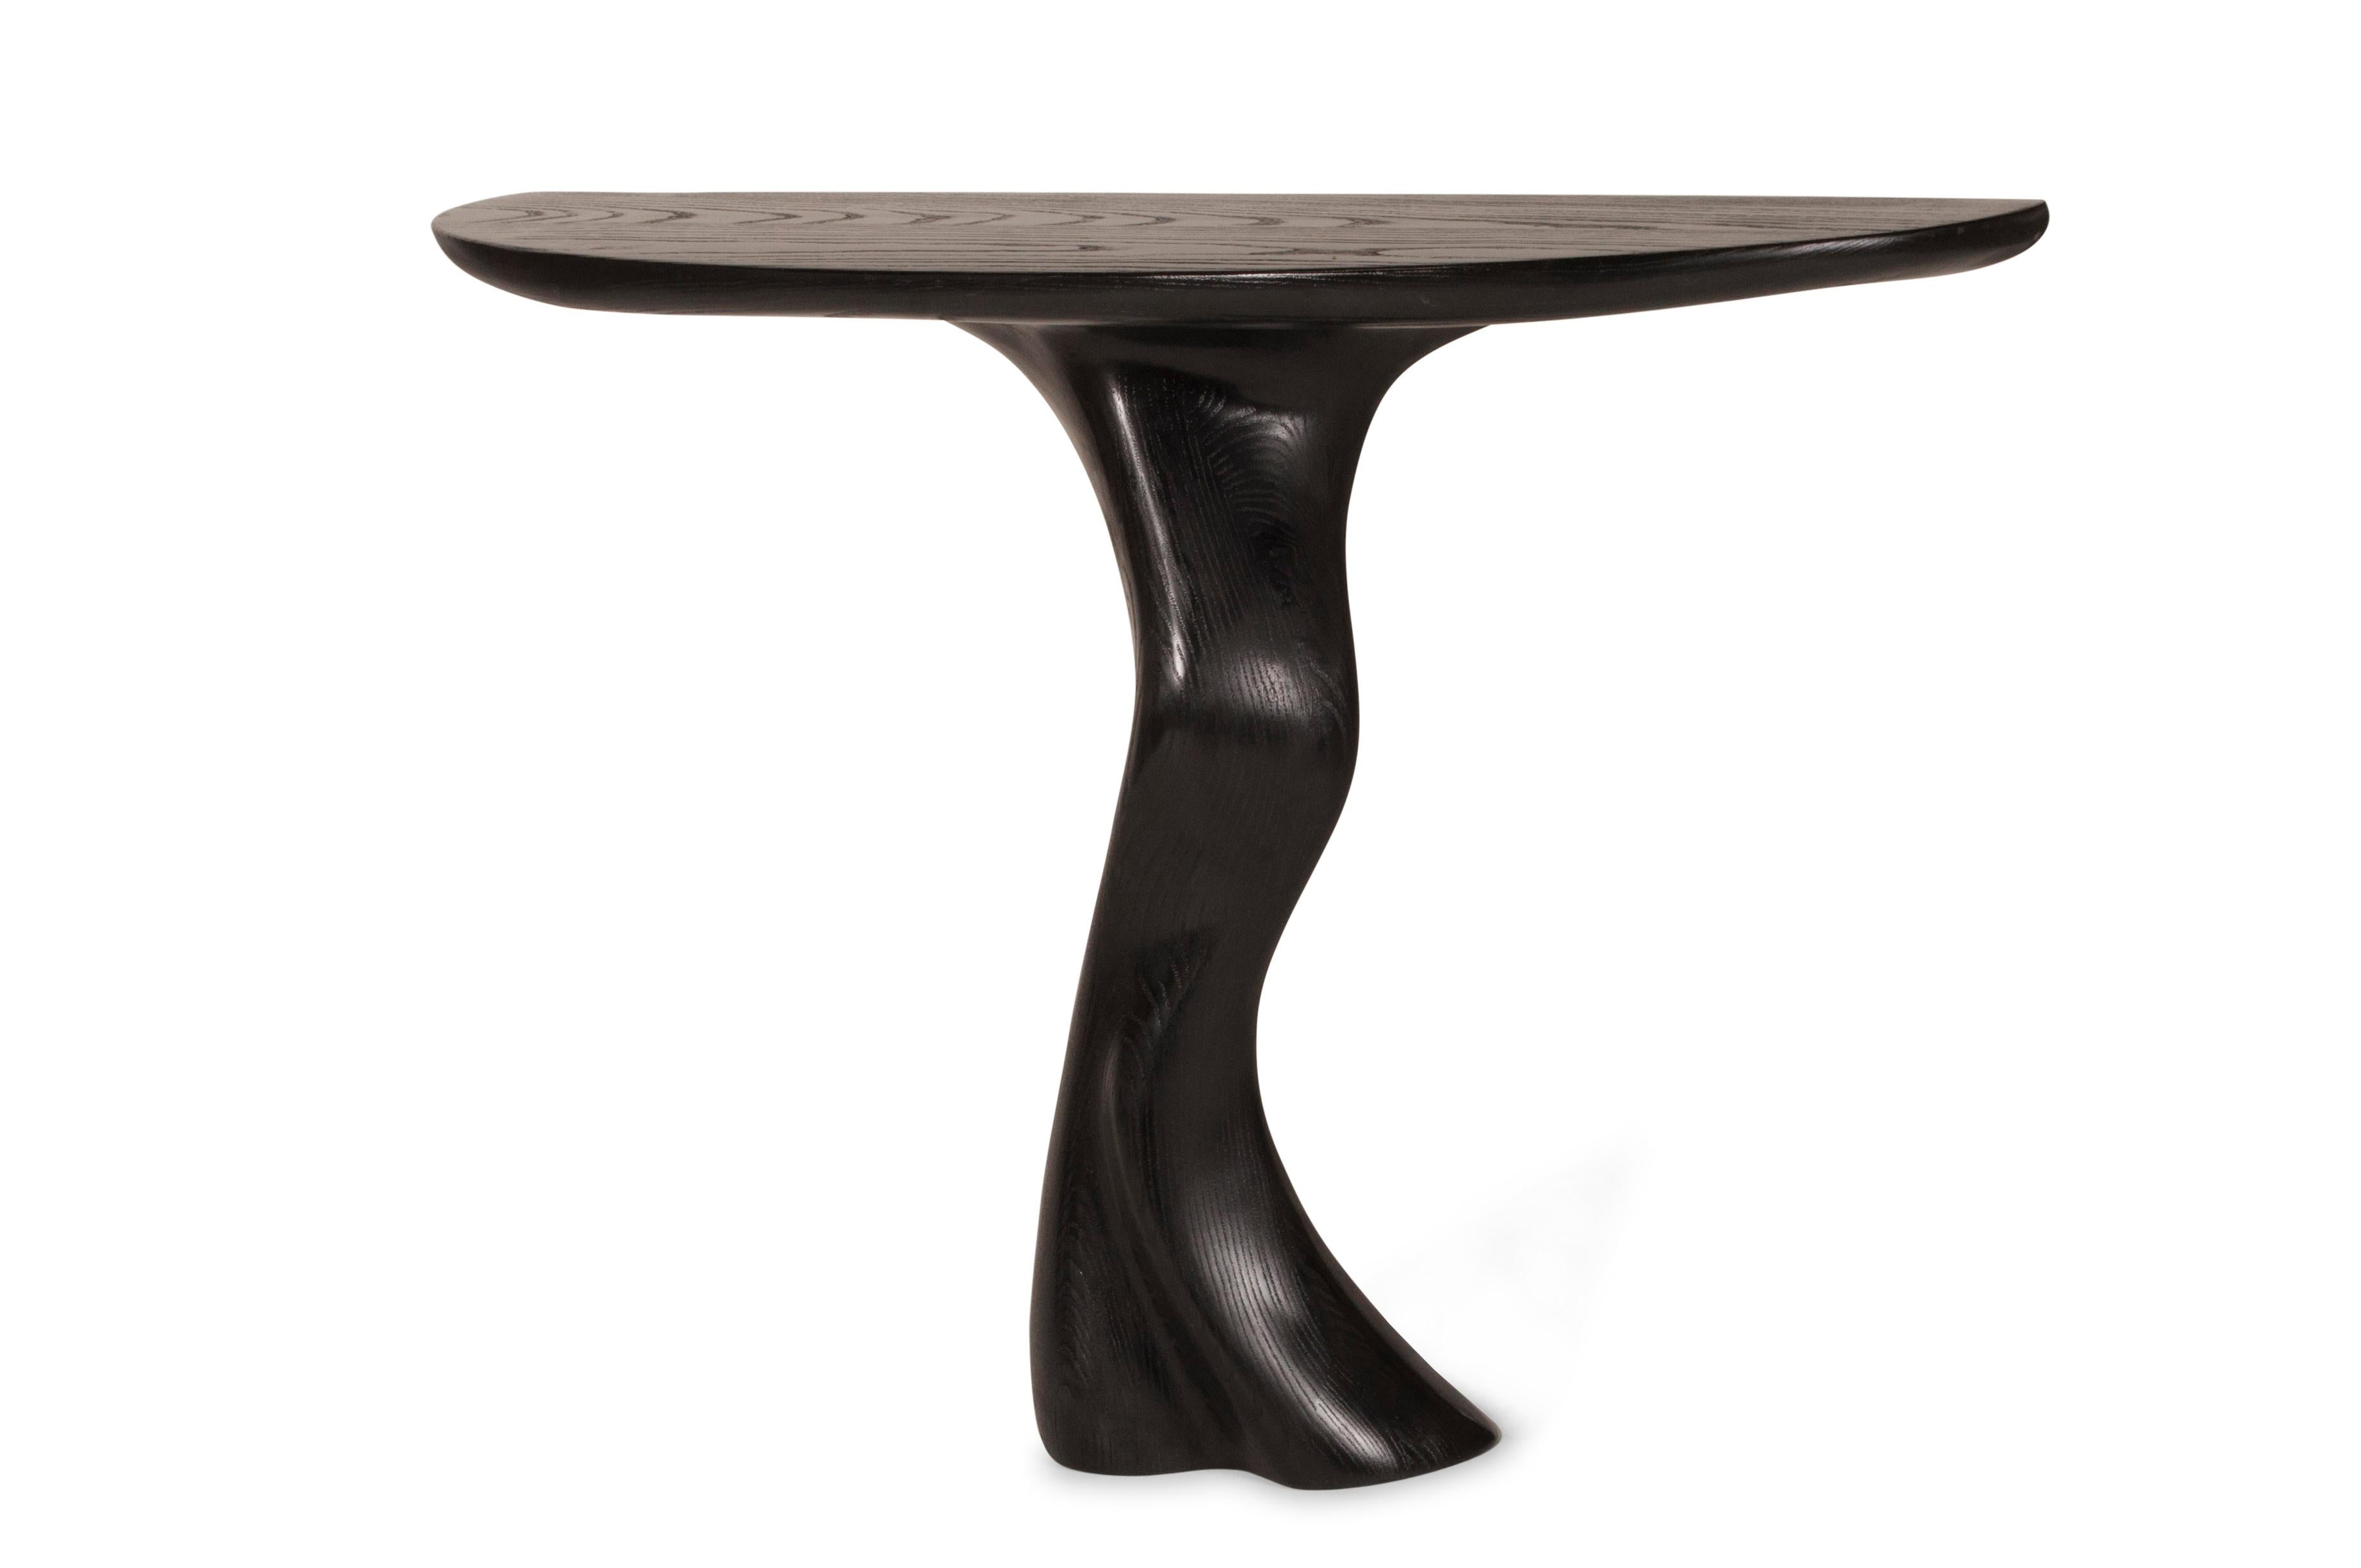 Organic Modern Haya Console Table, Solid Wood, Ebony Stained, Wall Mounted For Sale